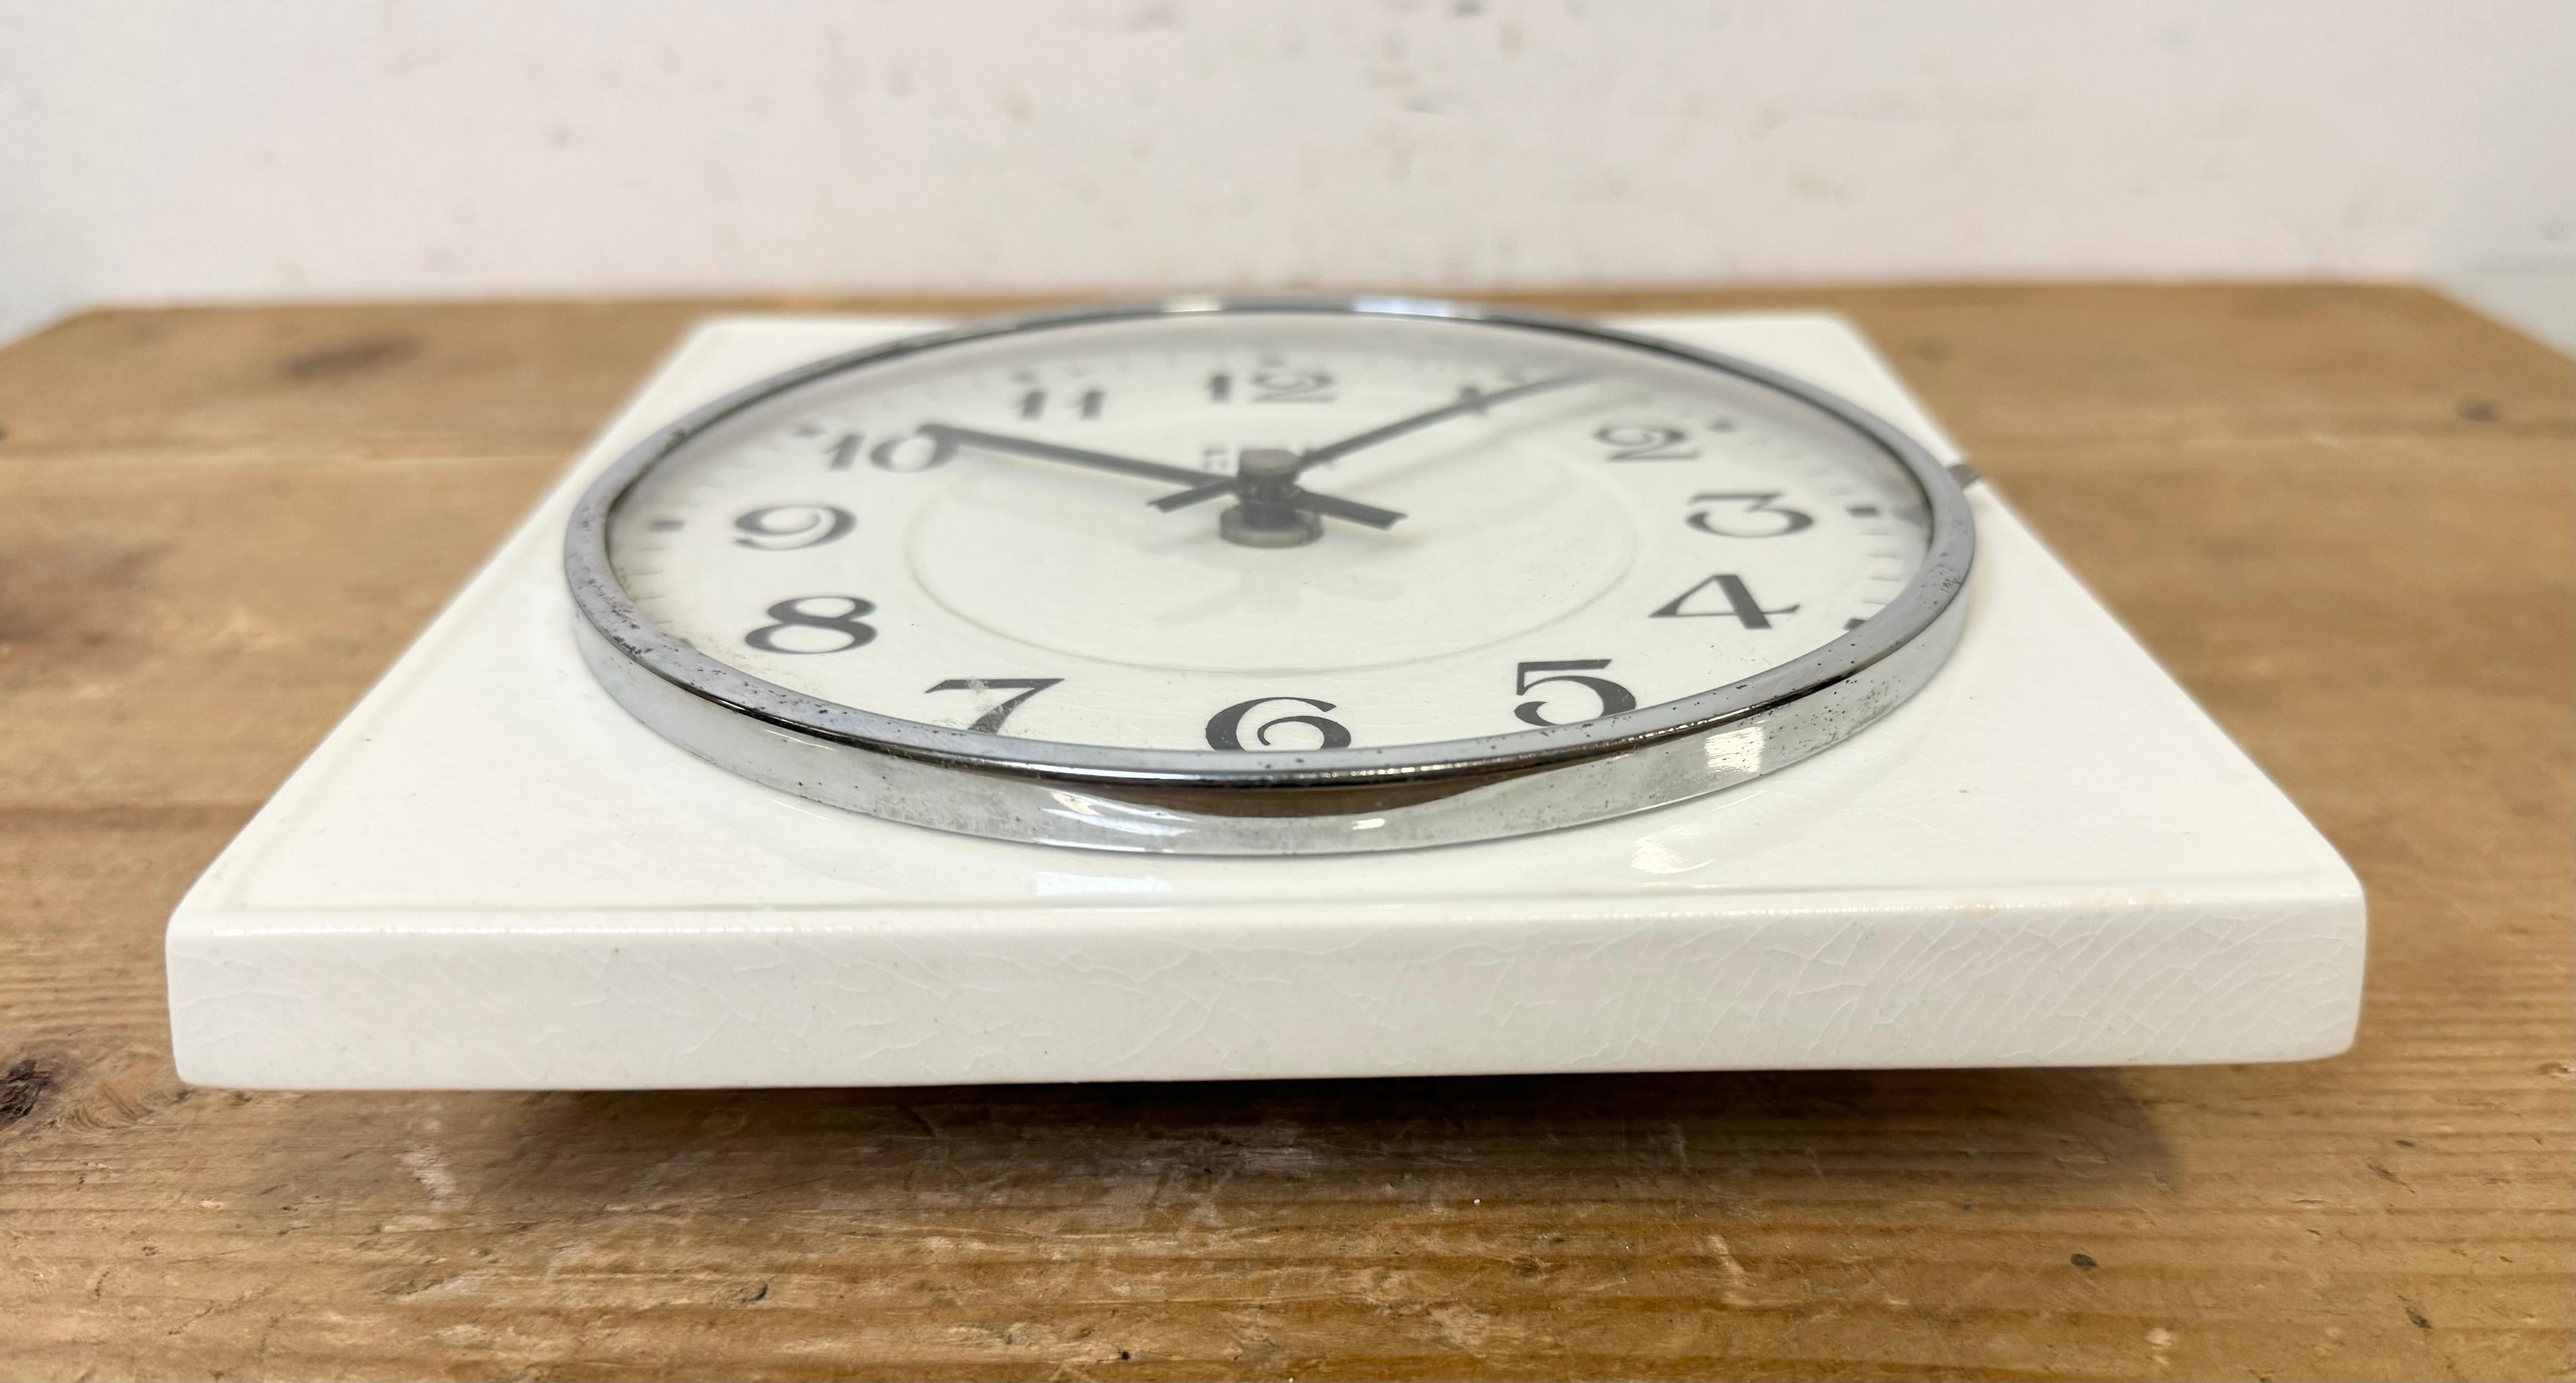 Vintage White Porcelain Wall Clock from Prim, 1970s For Sale 5